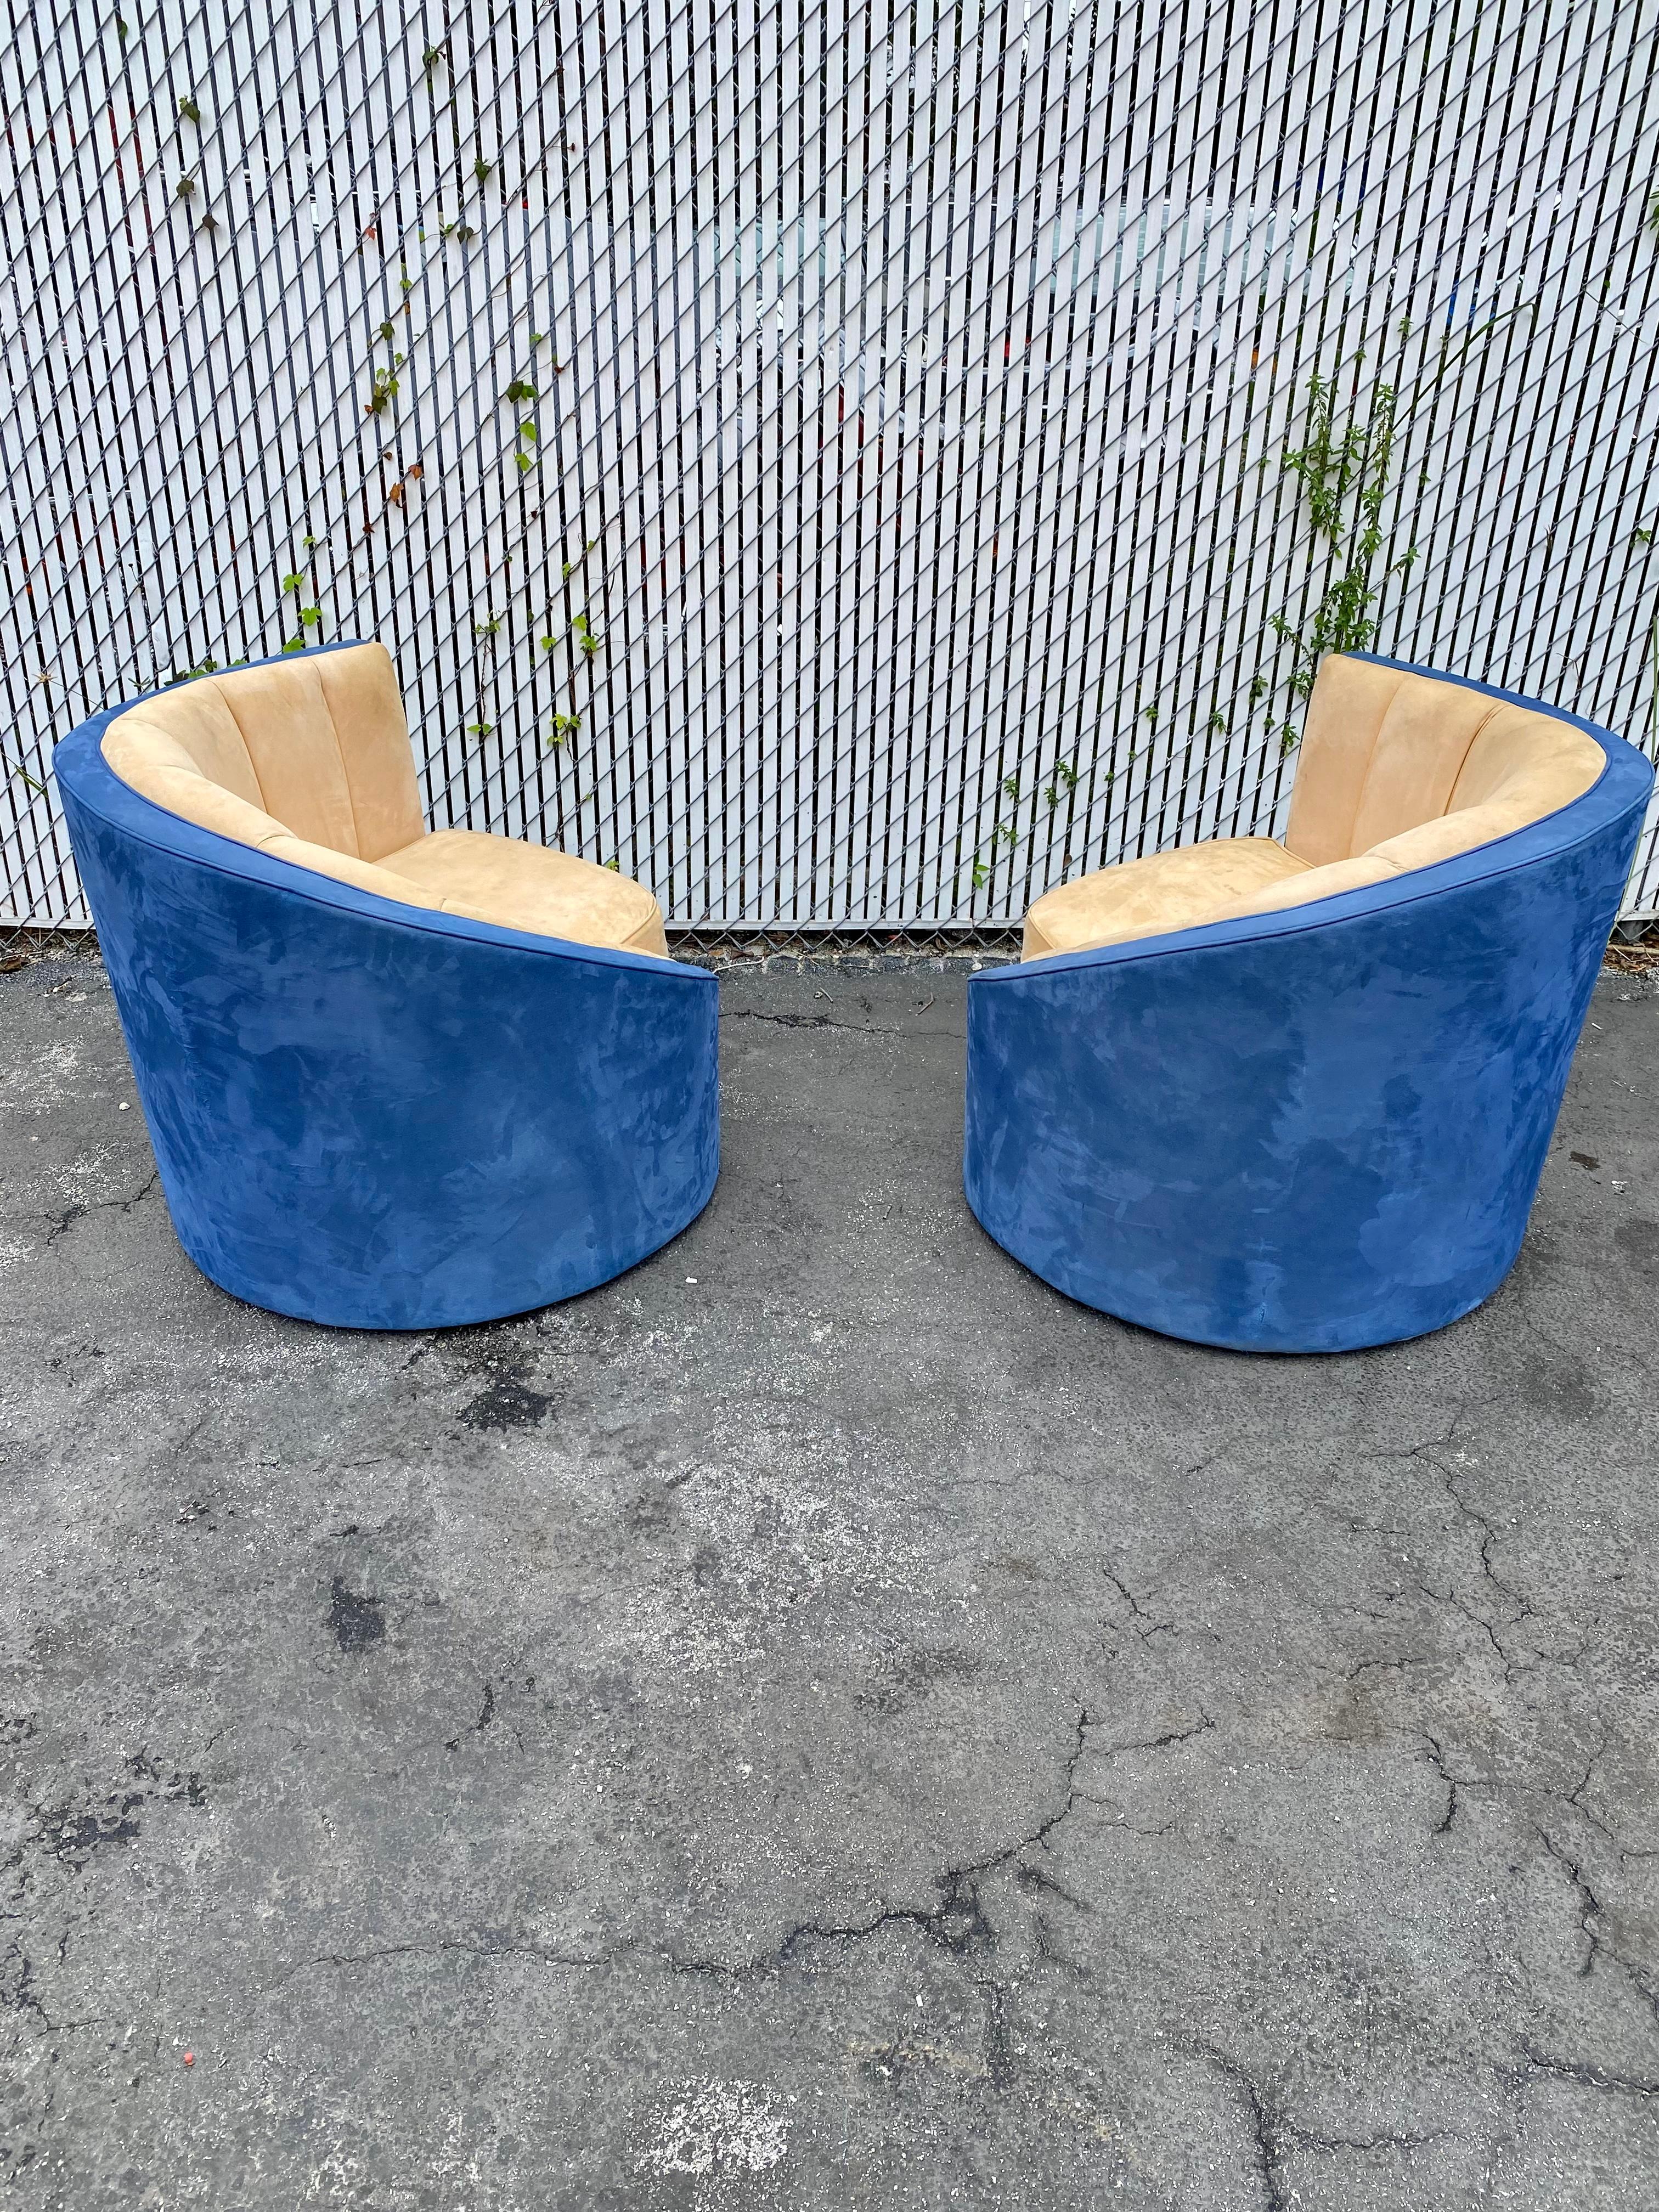 1990s Weiman Asymmetrical Channeled Barrel Chairs, Set of 2 In Good Condition For Sale In Fort Lauderdale, FL